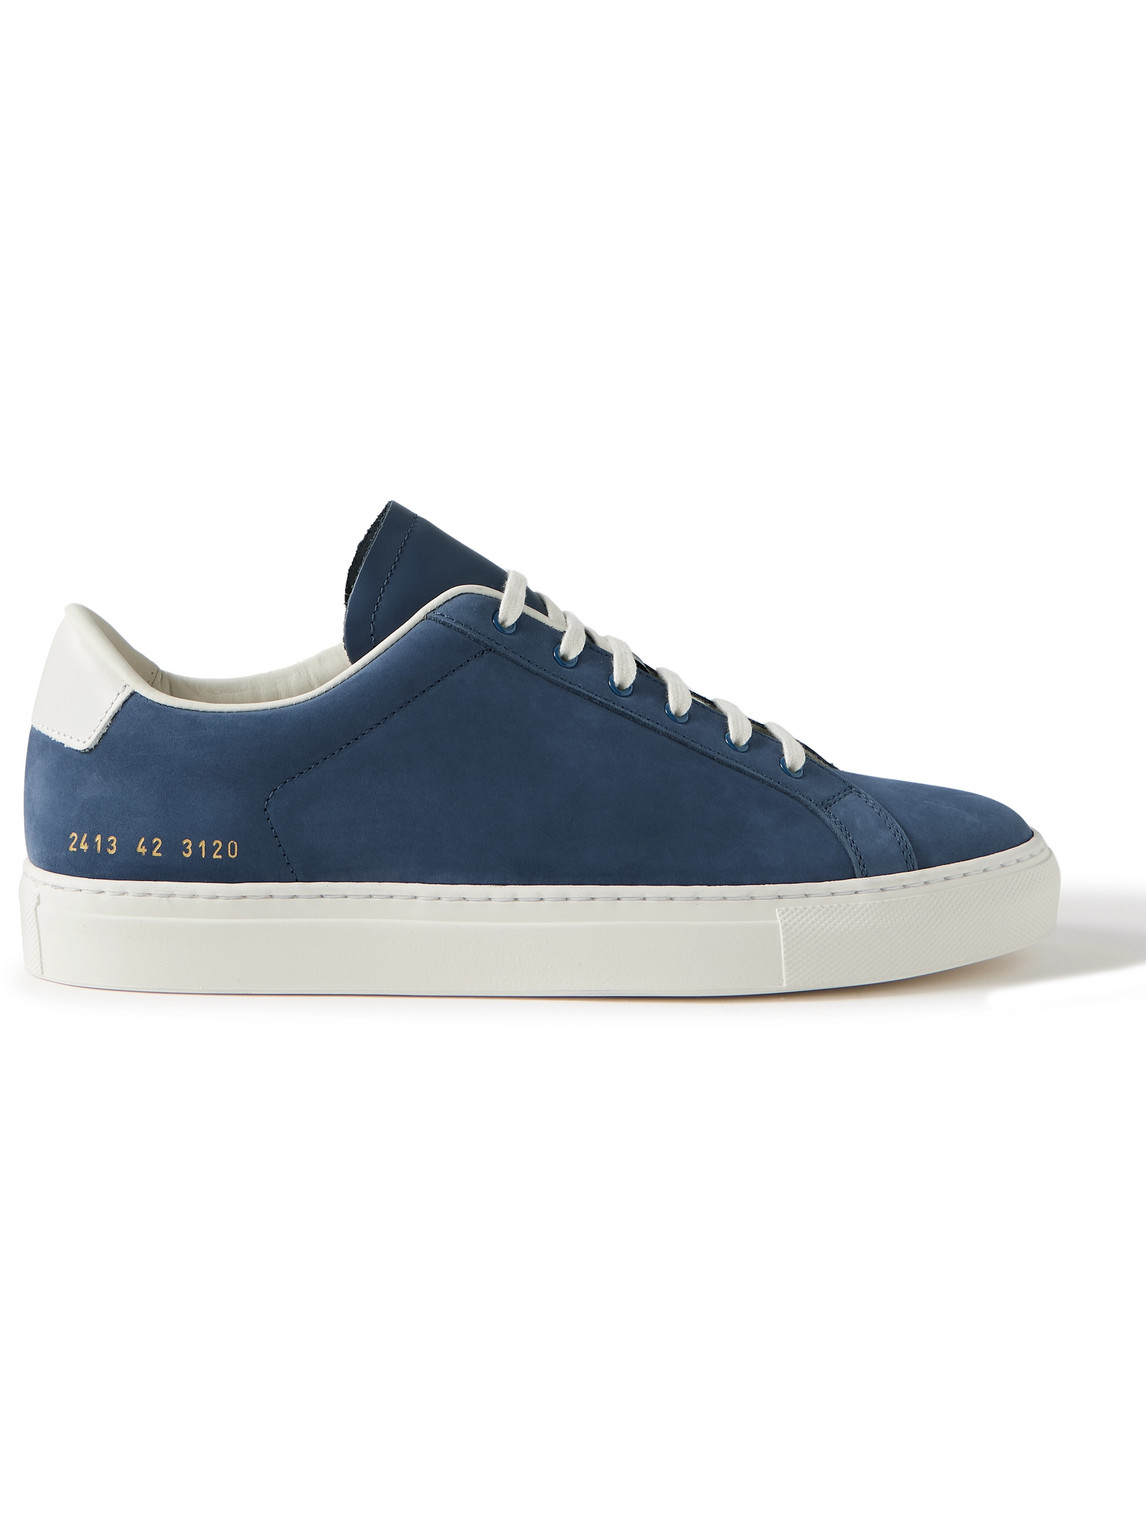 COMMON PROJECTS RETRO LEATHER-TRIMMED NUBUCK SNEAKERS